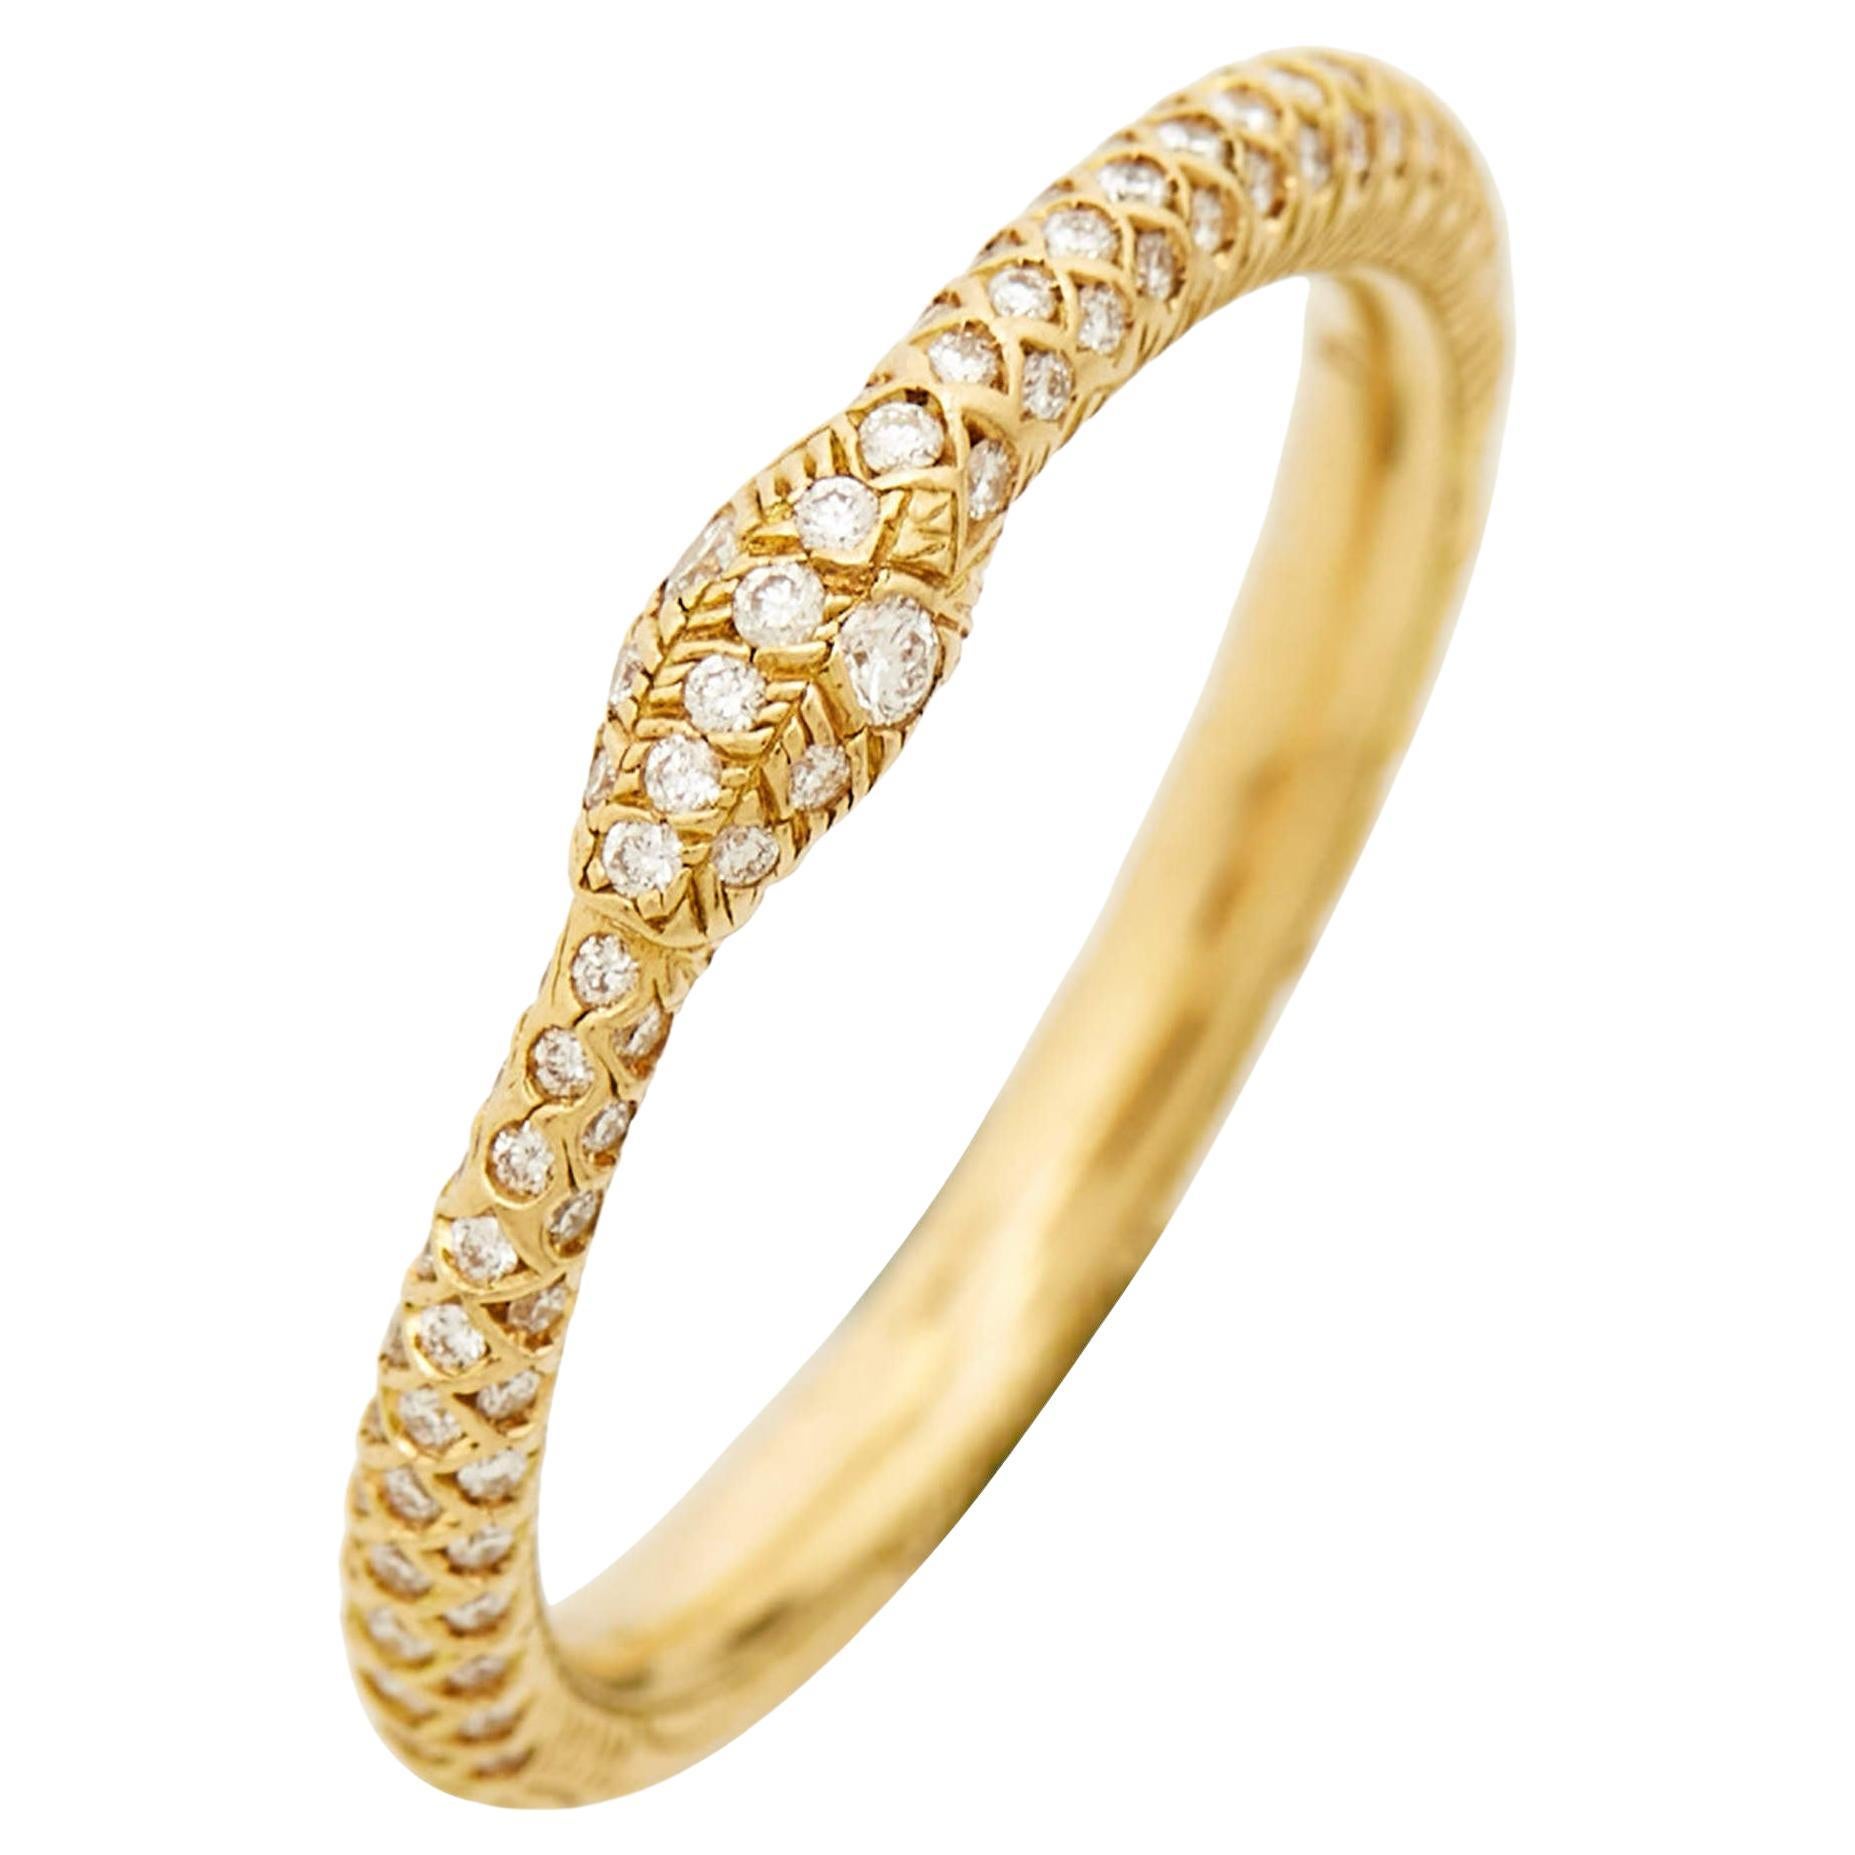 Chanel Gold CC Resin Tone Ring Size 53 Contemporary